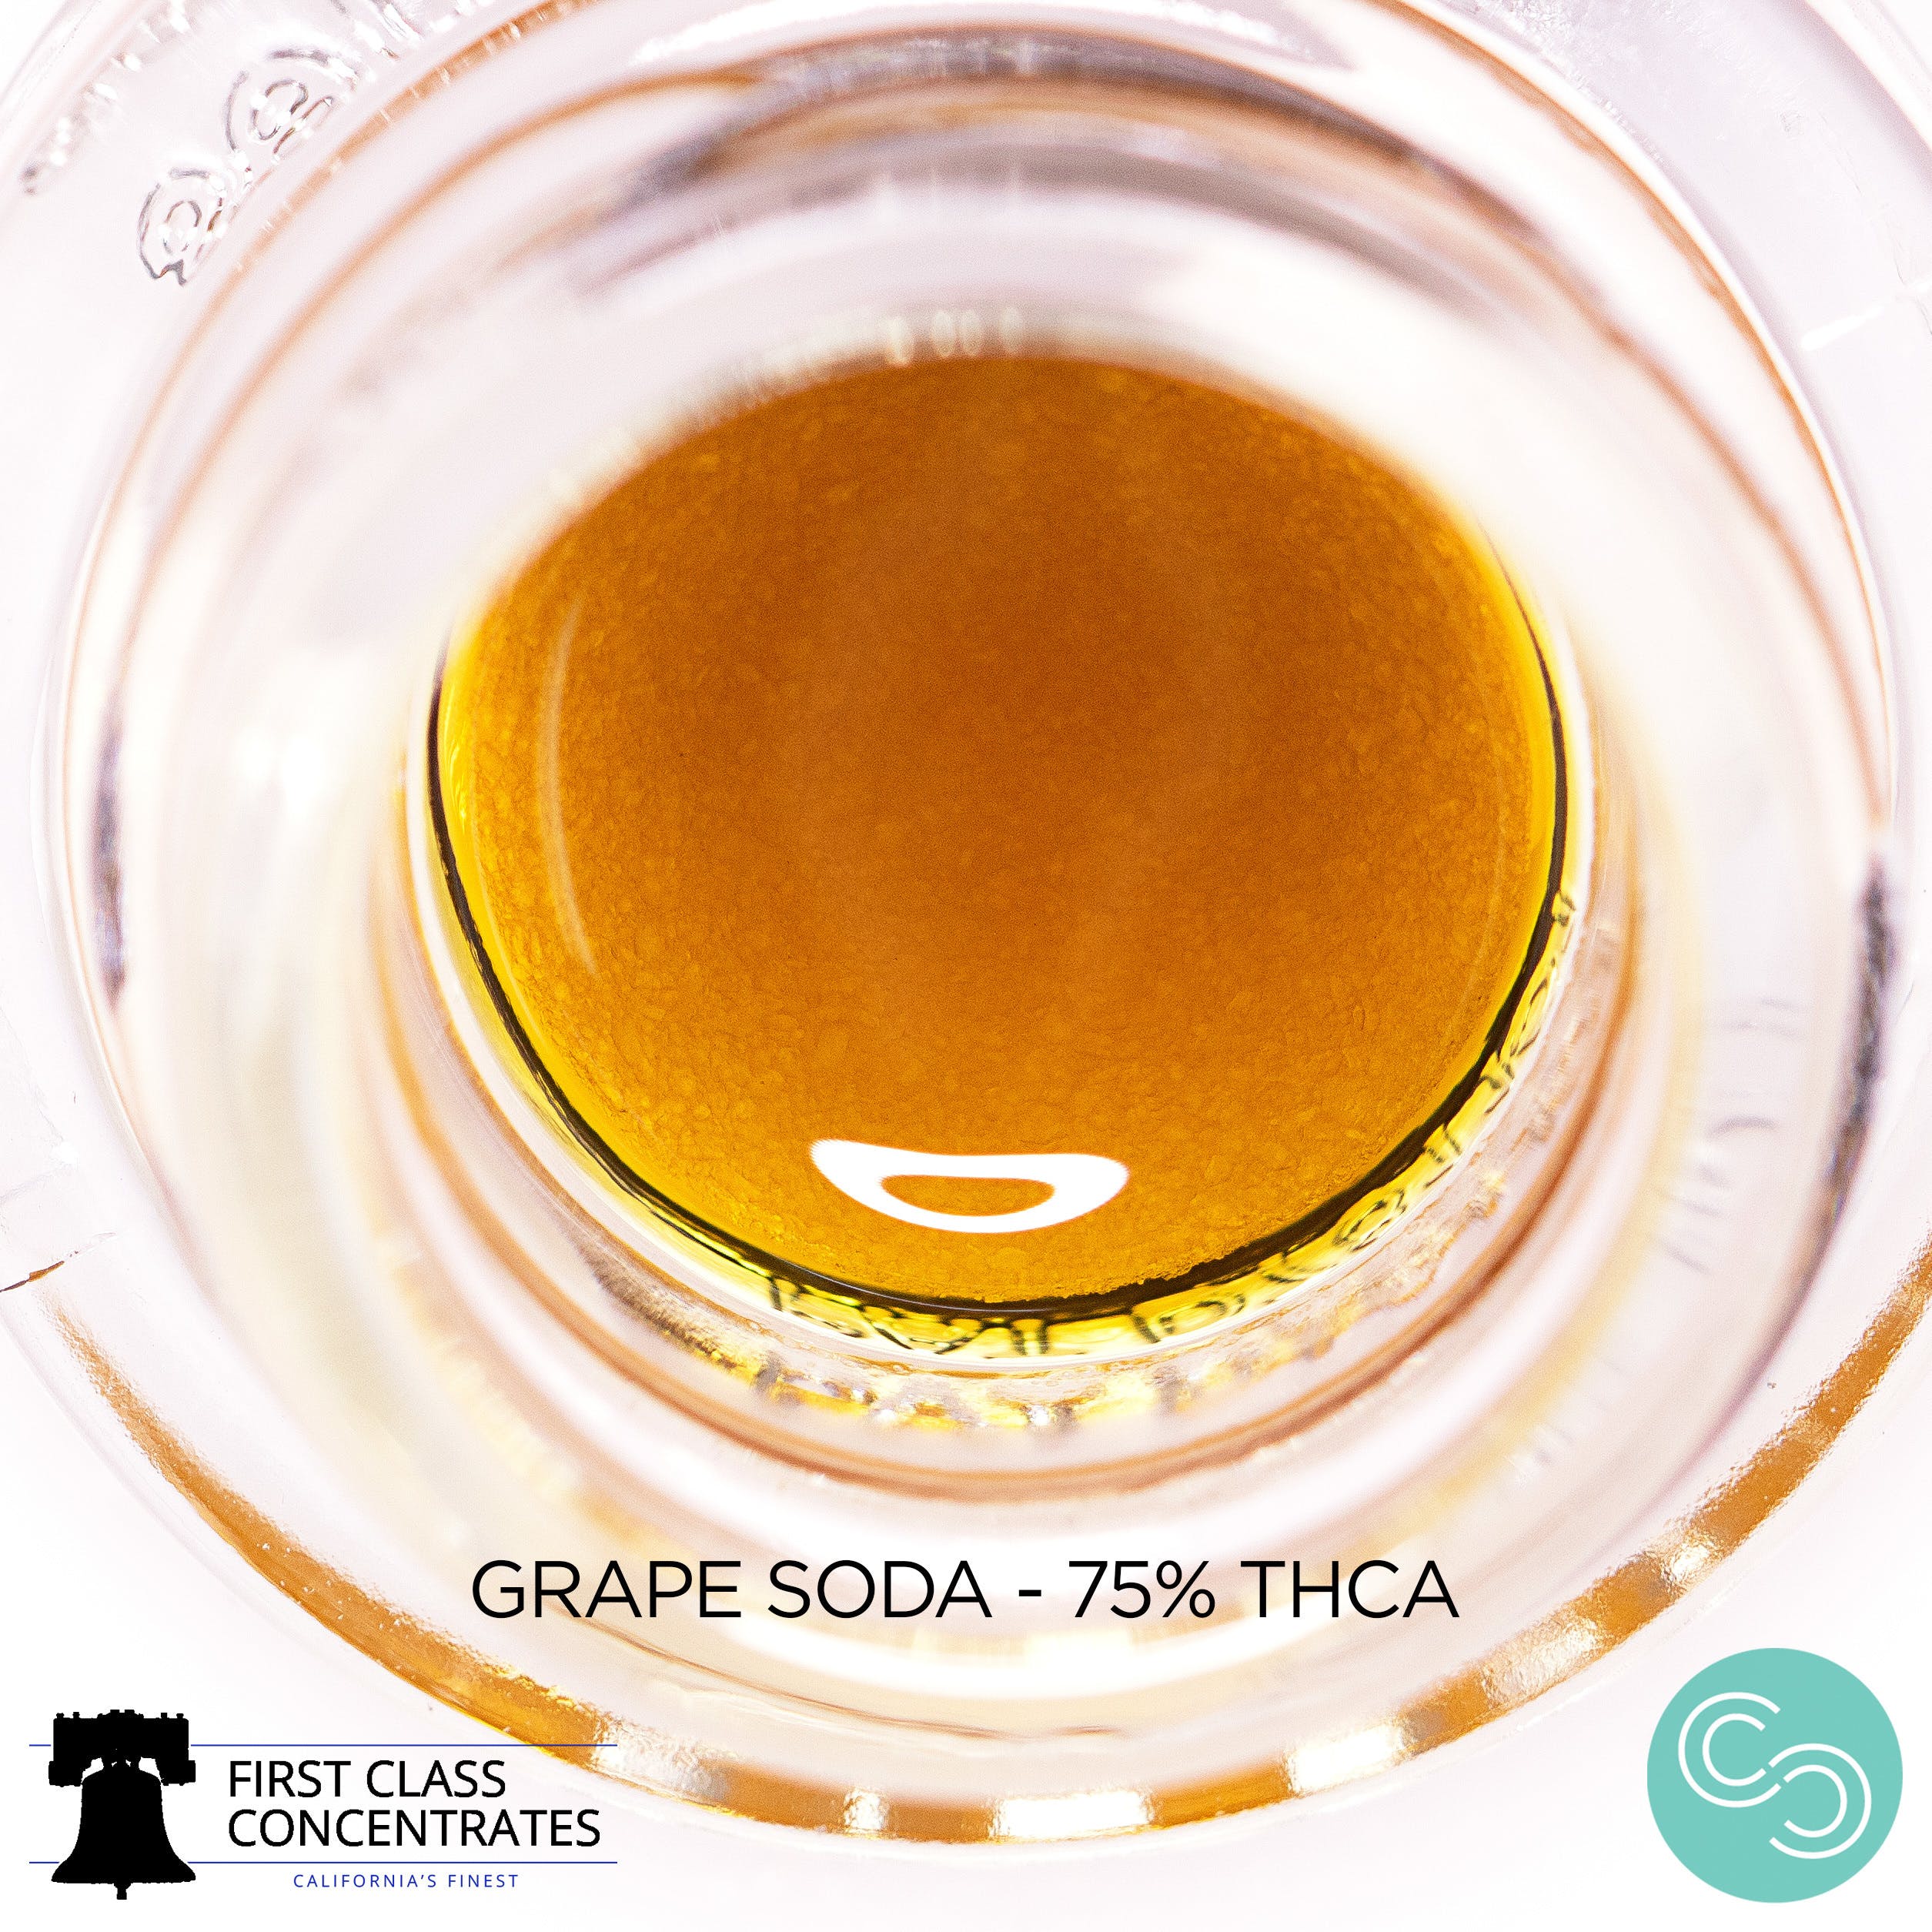 First Class Concentrates - Grape Soda - 75% THCA